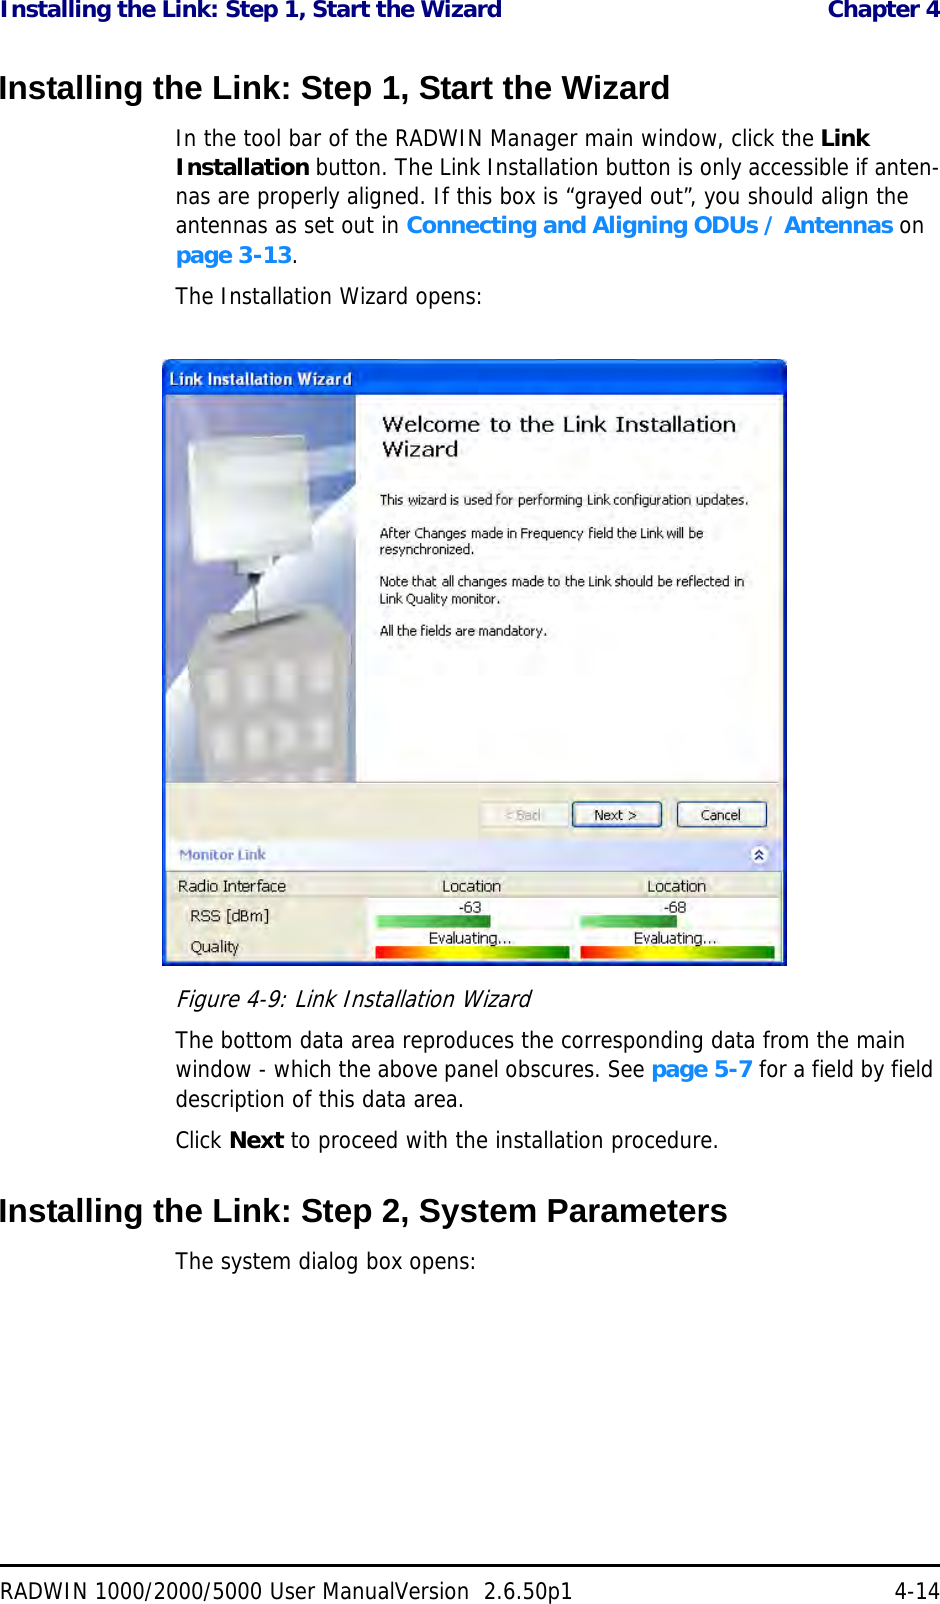 Installing the Link: Step 1, Start the Wizard  Chapter 4RADWIN 1000/2000/5000 User ManualVersion  2.6.50p1 4-14Installing the Link: Step 1, Start the WizardIn the tool bar of the RADWIN Manager main window, click the Link Installation button. The Link Installation button is only accessible if anten-nas are properly aligned. If this box is “grayed out”, you should align the antennas as set out in Connecting and Aligning ODUs / Antennas on page 3-13.The Installation Wizard opens:Figure 4-9: Link Installation WizardThe bottom data area reproduces the corresponding data from the main window - which the above panel obscures. See page 5-7 for a field by field description of this data area.Click Next to proceed with the installation procedure.Installing the Link: Step 2, System ParametersThe system dialog box opens: